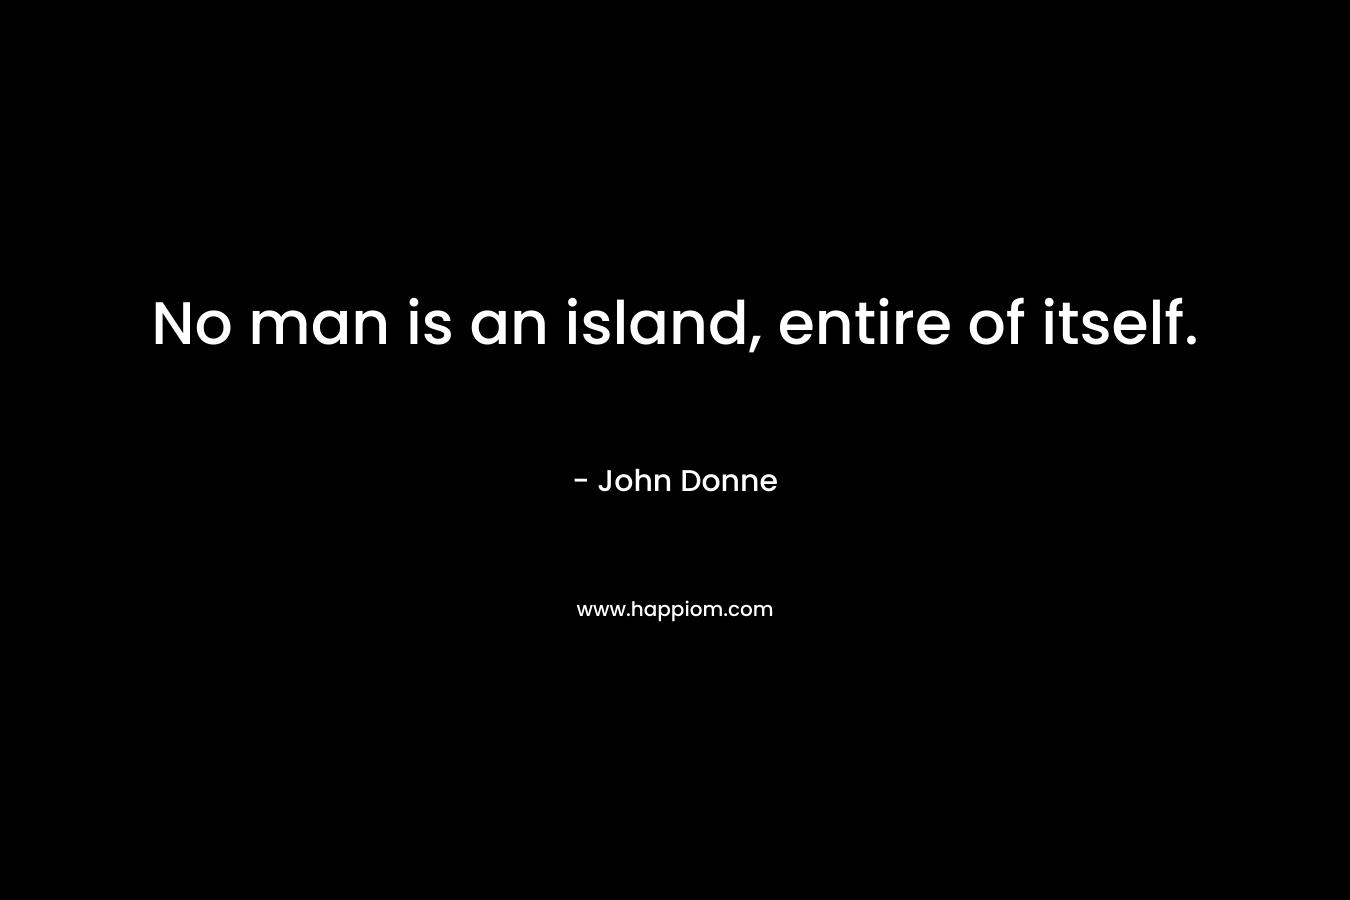 No man is an island, entire of itself. – John Donne